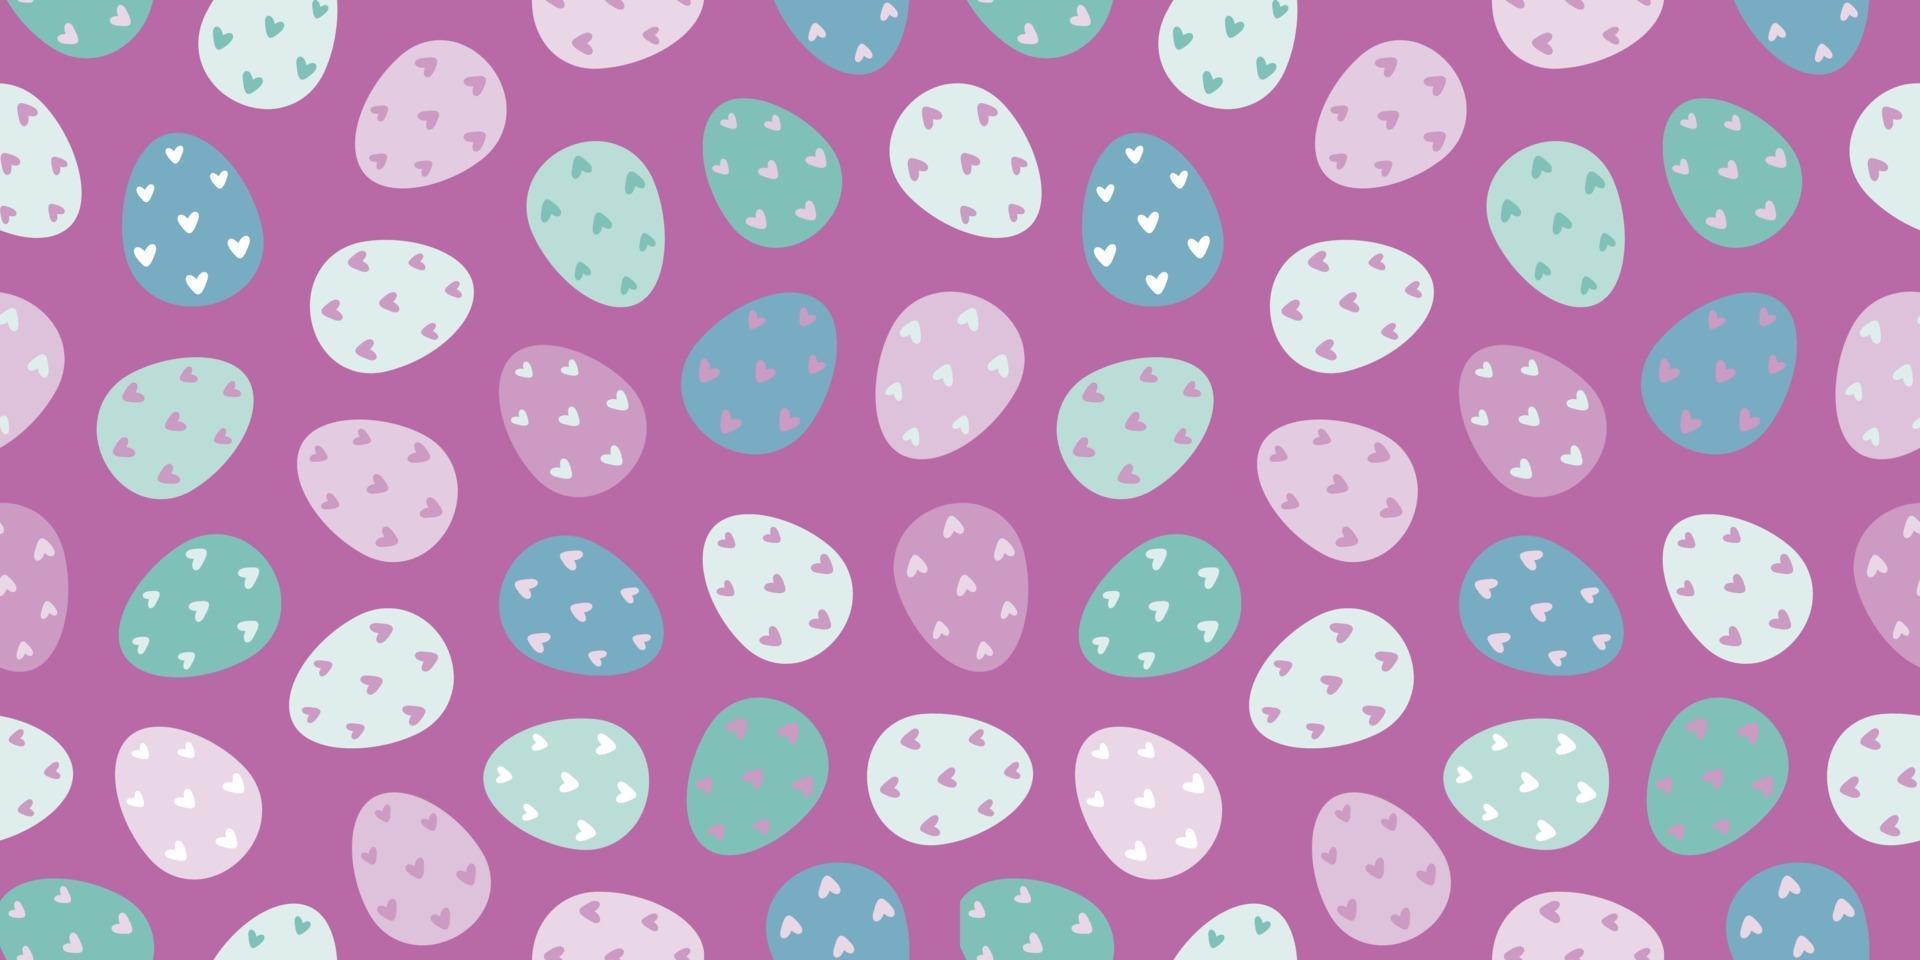 Easter eggs seamless pattern. Decorated Easter eggs on a white background. Design for textiles, packaging, wrappers, greeting cards, paper, printing. Vector illustration